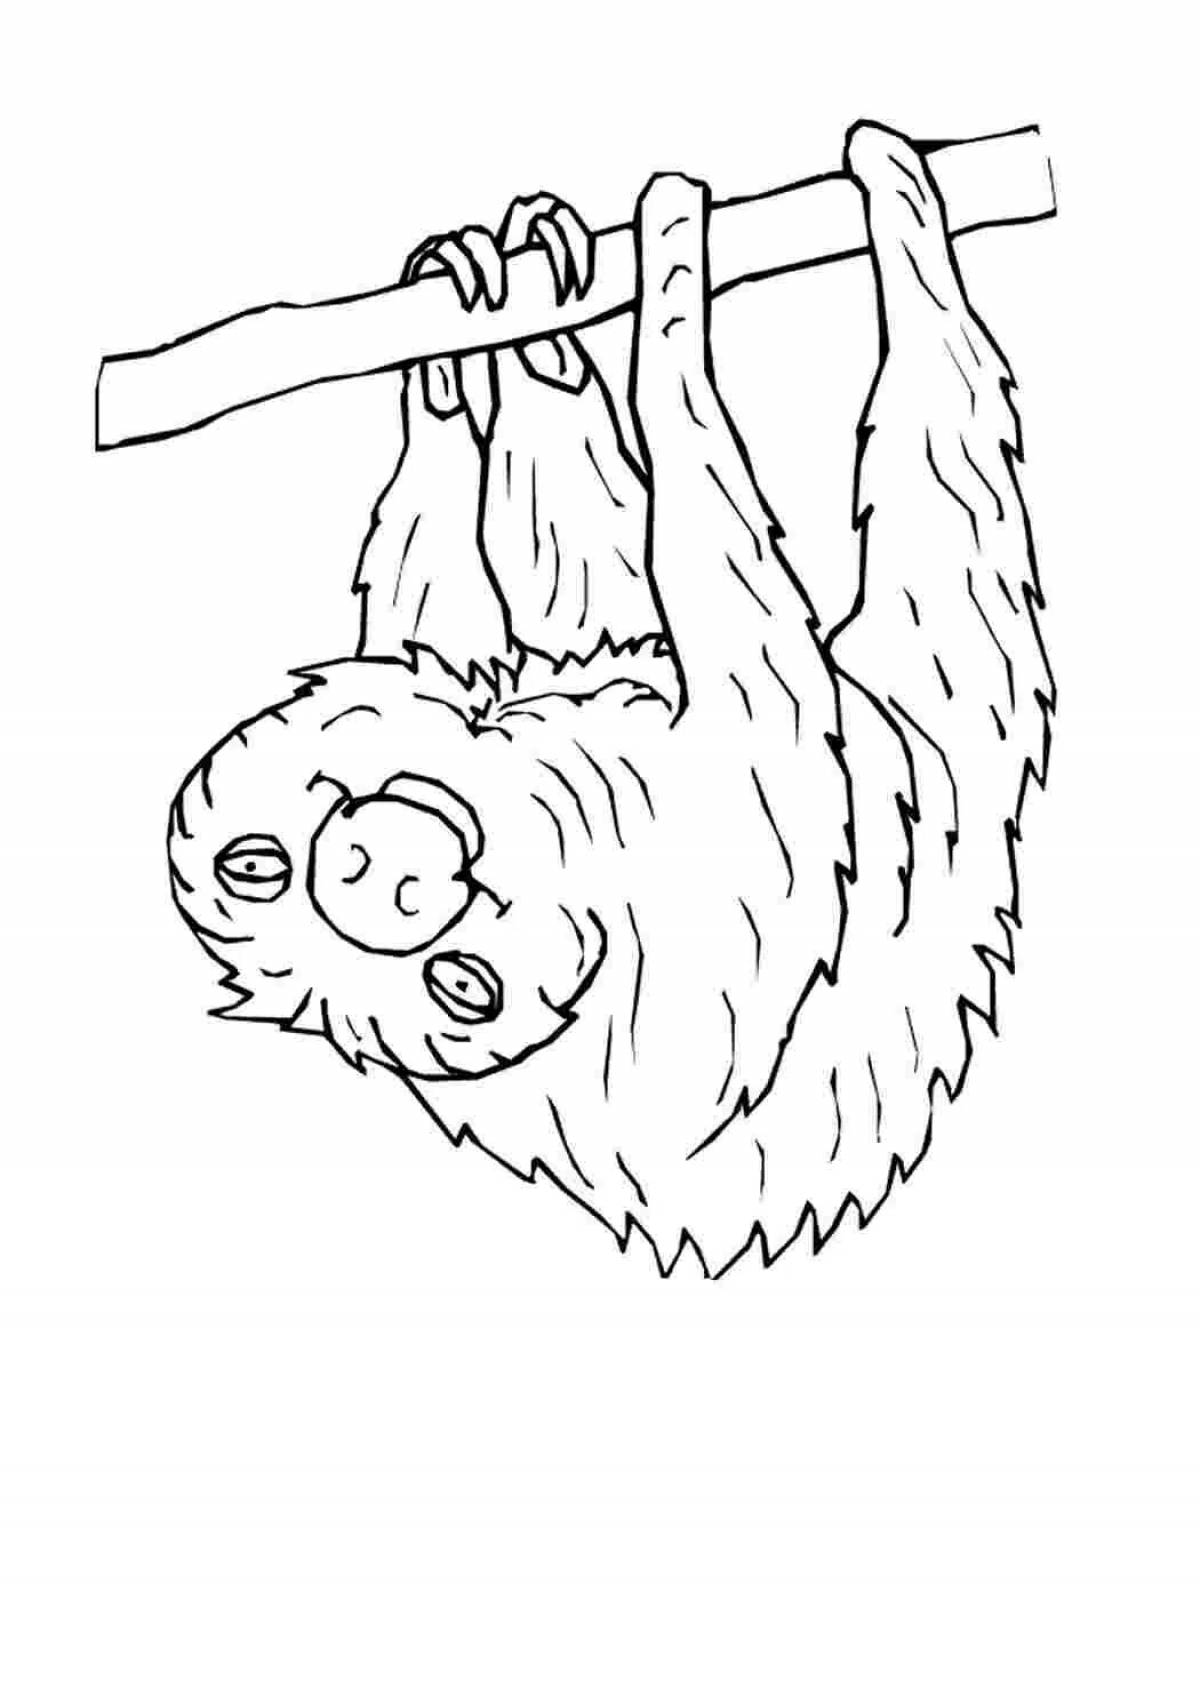 Relaxing sloth coloring book for kids